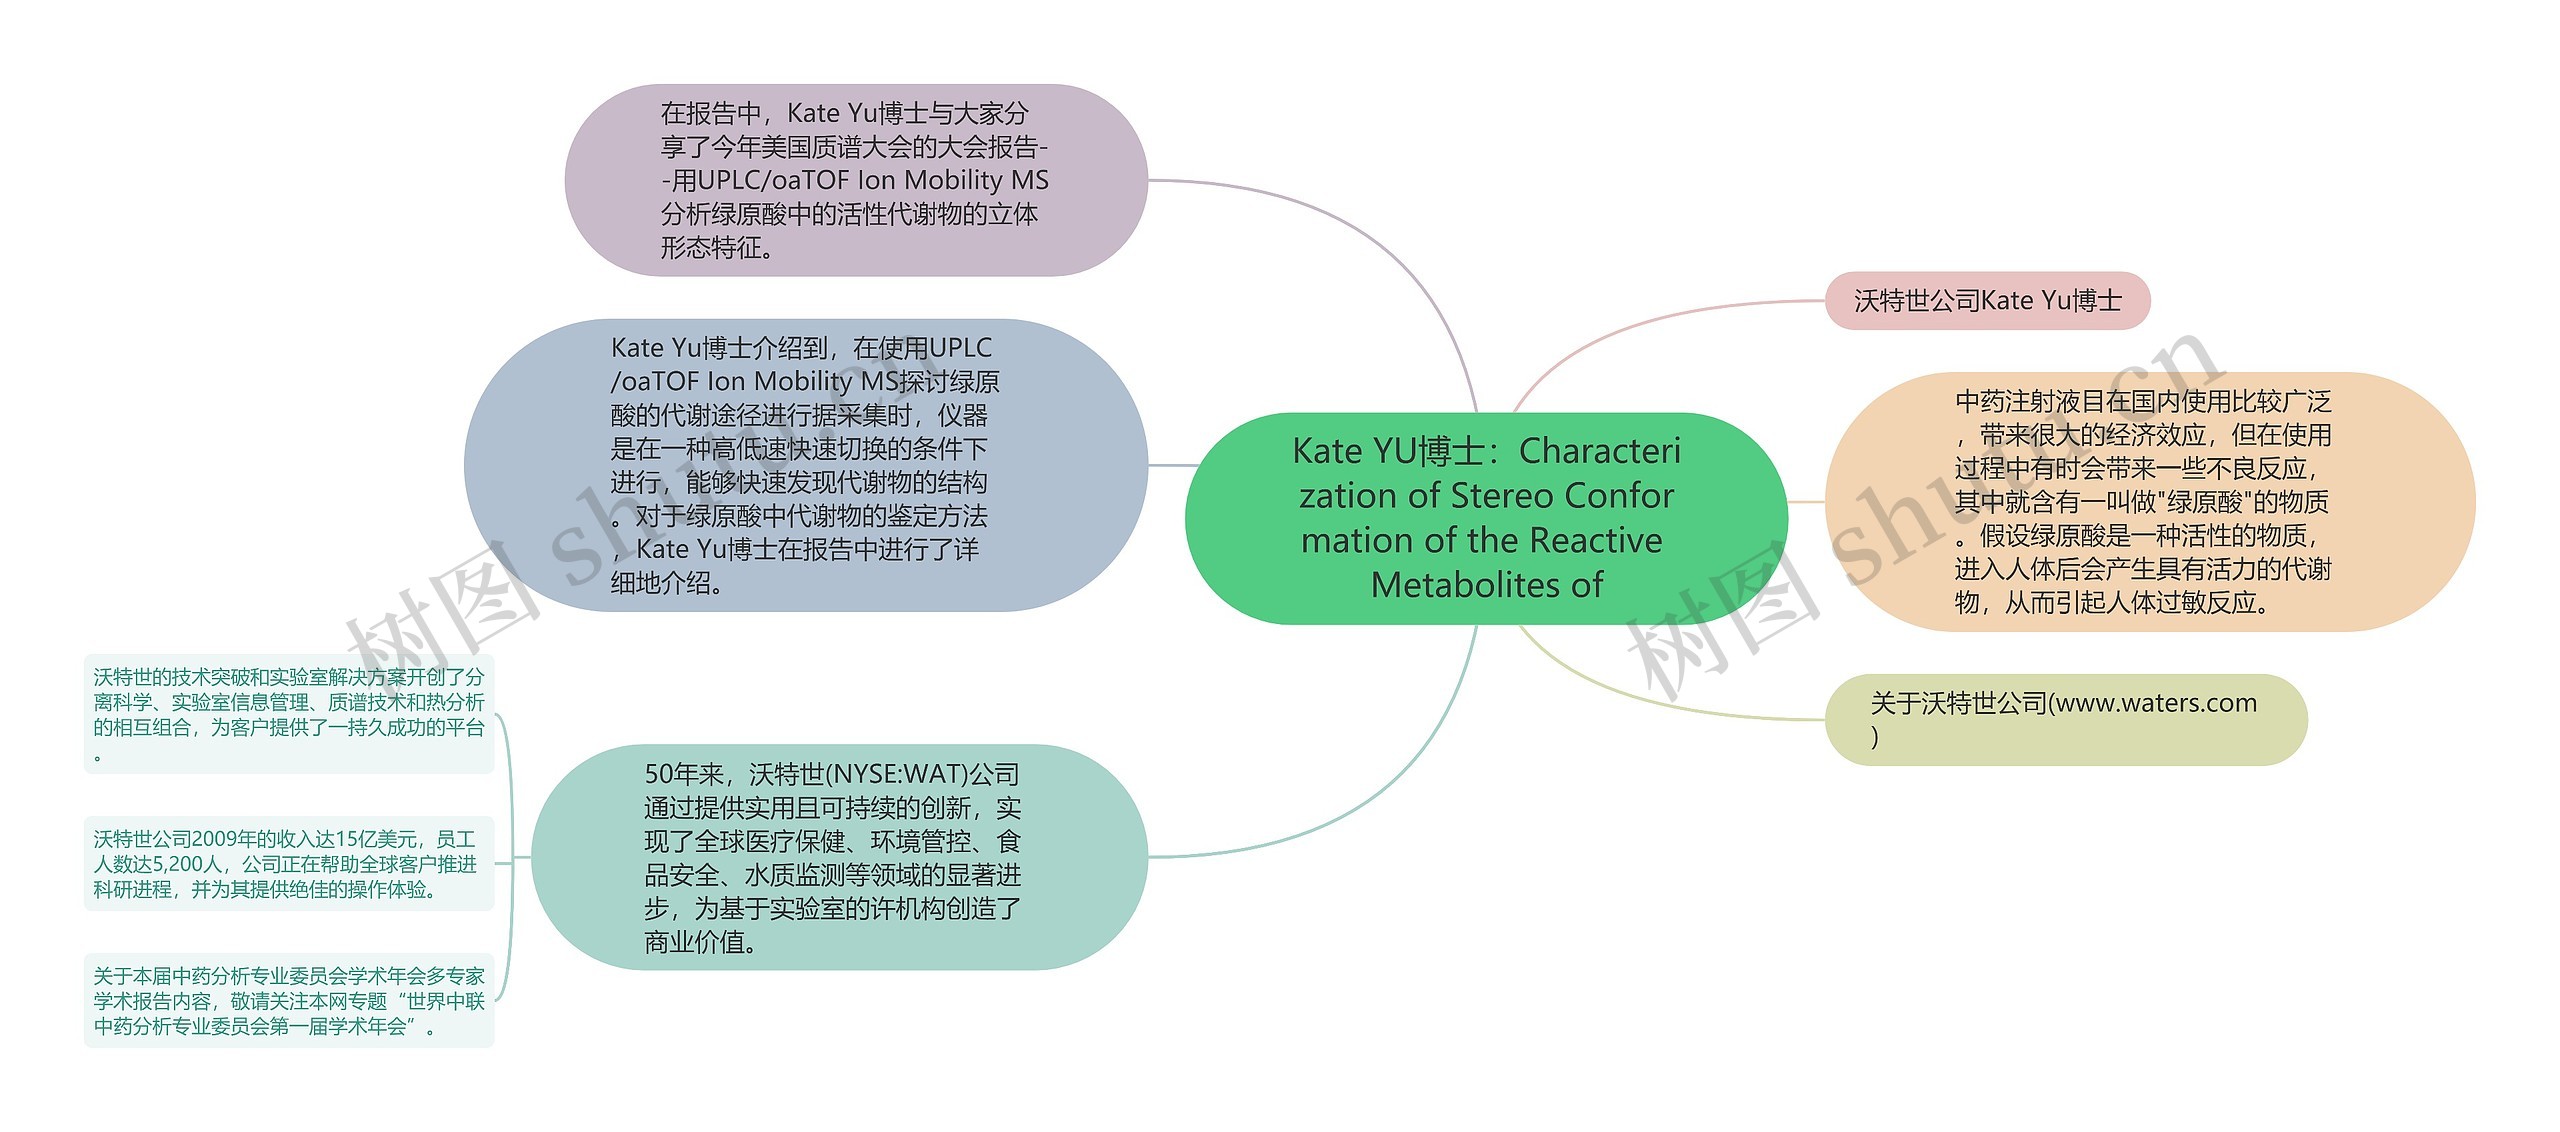 Kate YU博士：Characterization of Stereo Conformation of the Reactive Metabolites of思维导图